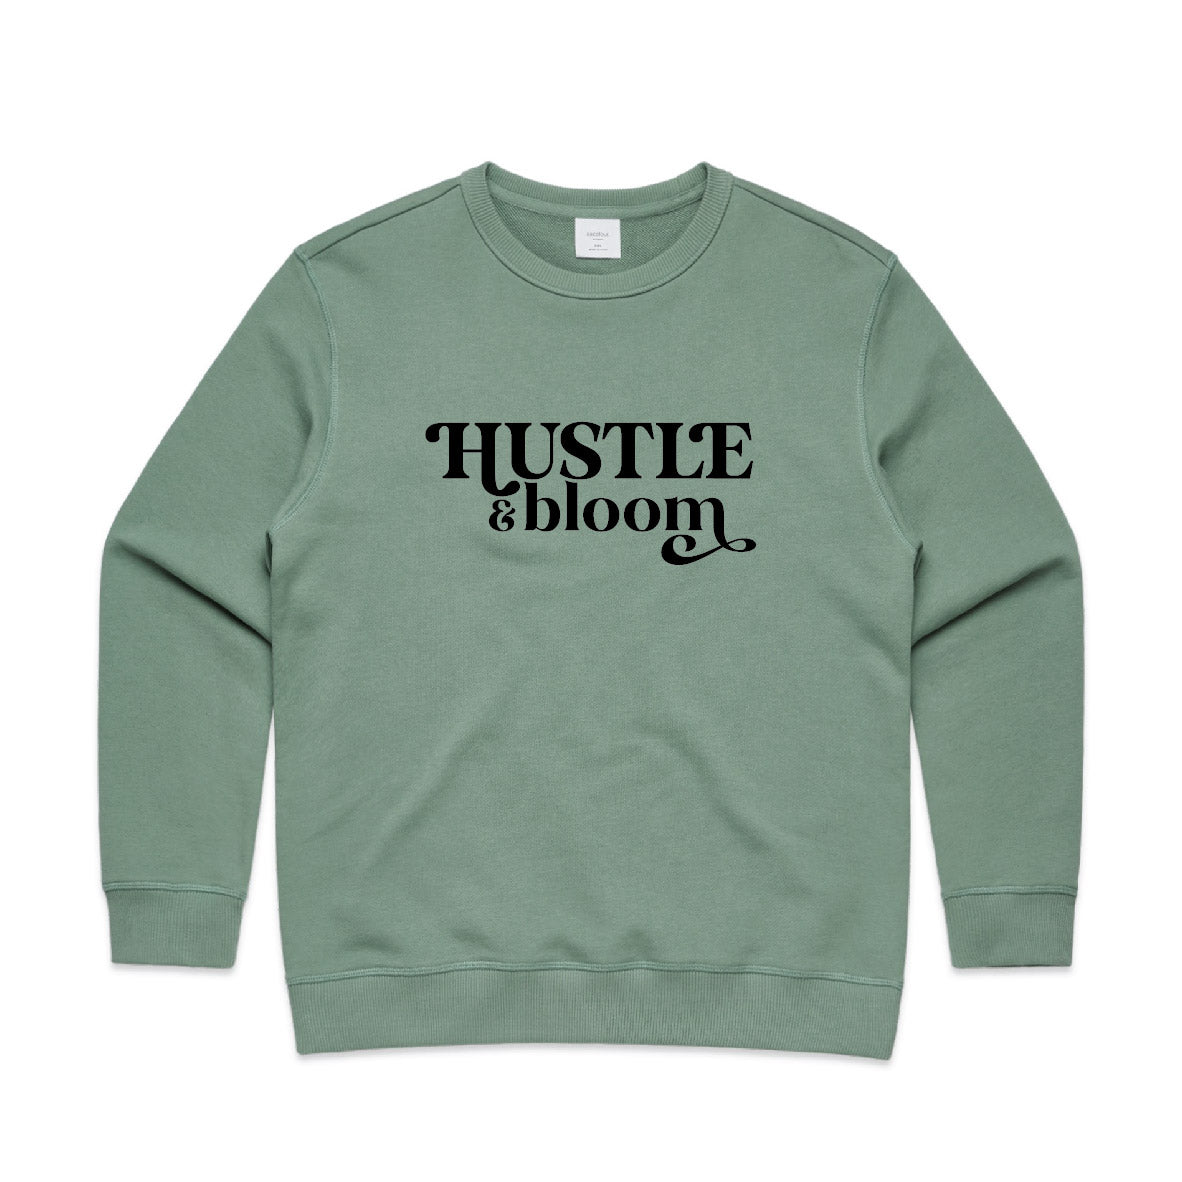 Sage Green crew neck jumper with black text stating "Hustle and Bloom"